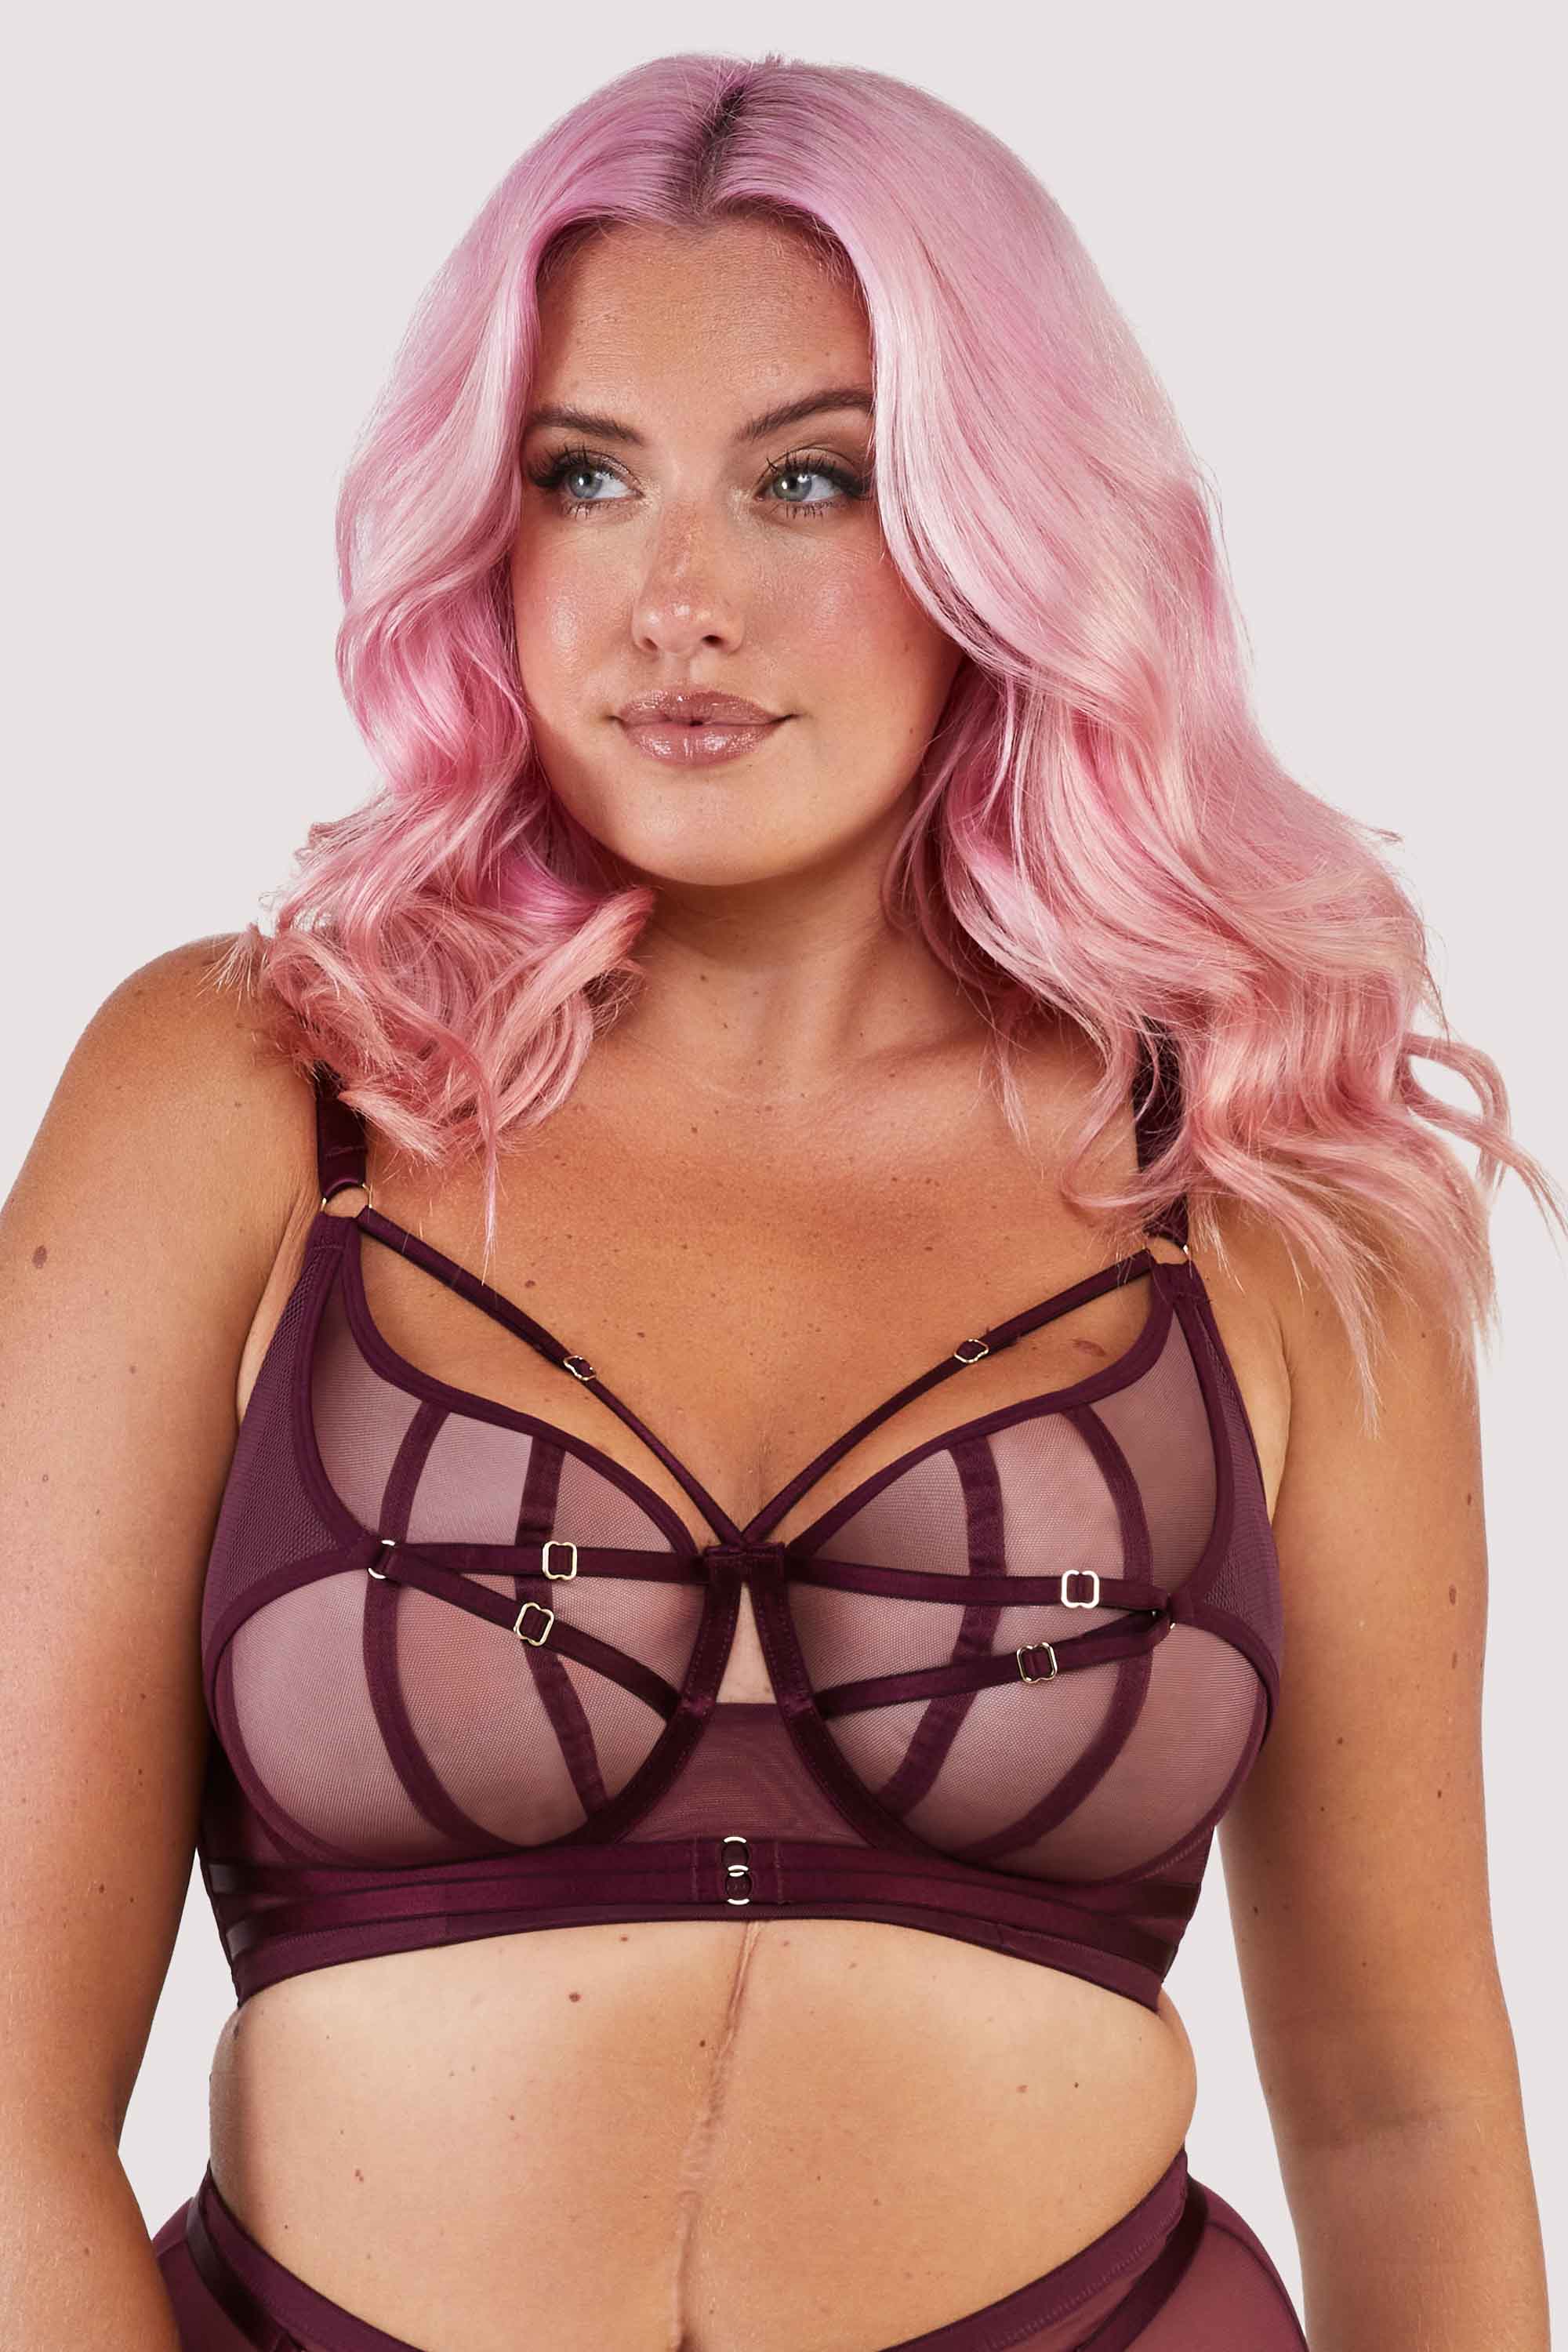 Harness style bra with mesh overlay and visible gold hardware in a deep wine red/purple.